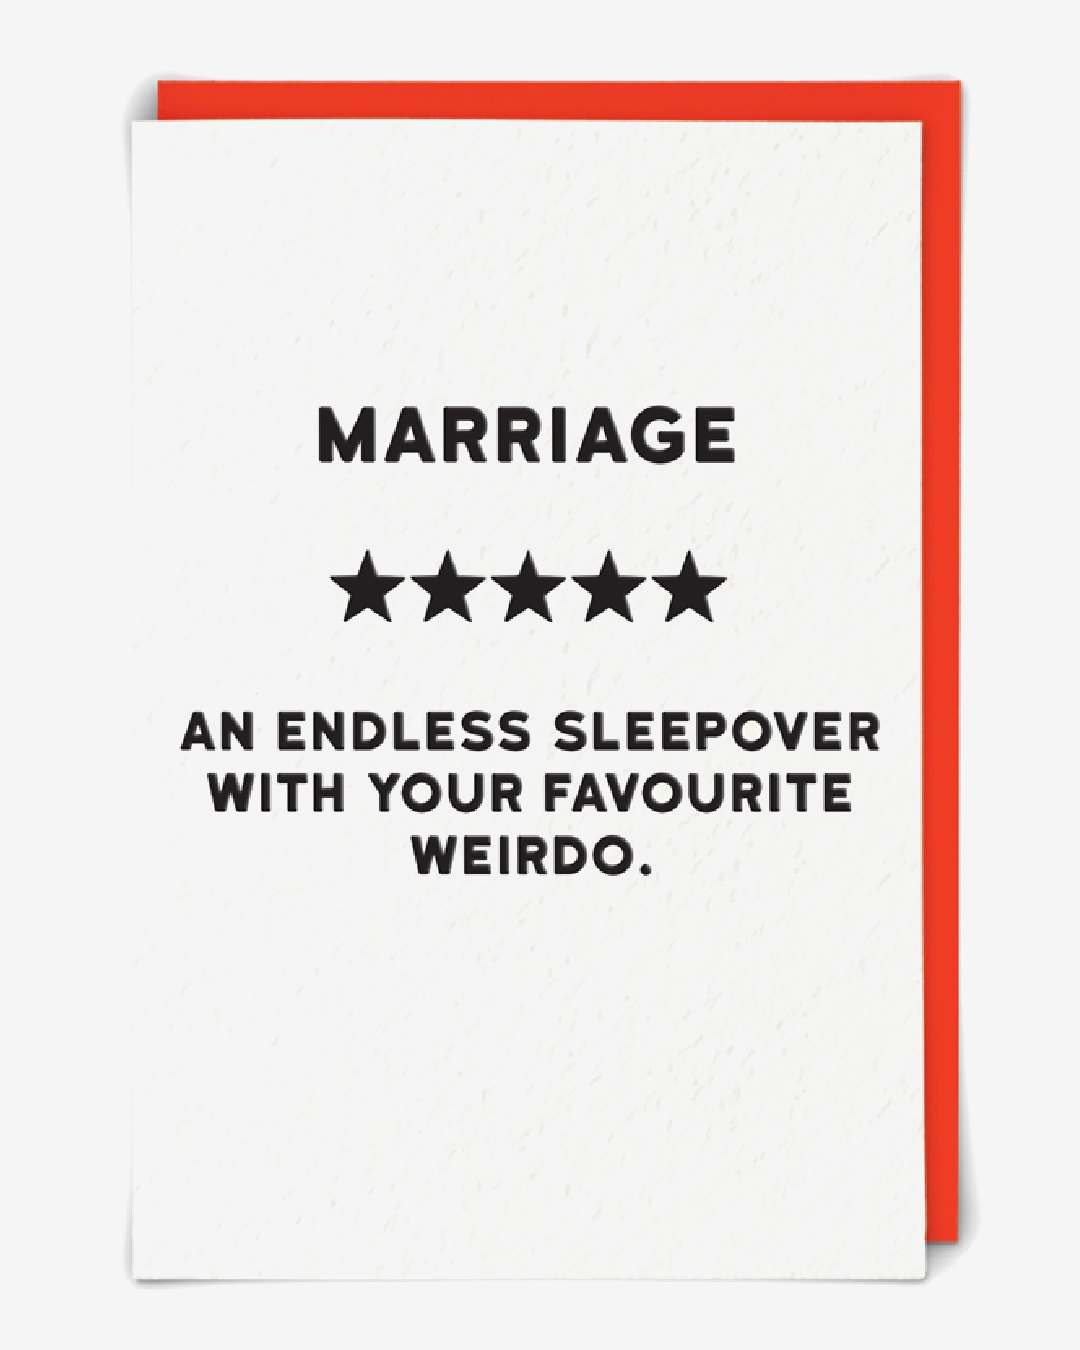 Marriage 5 star card